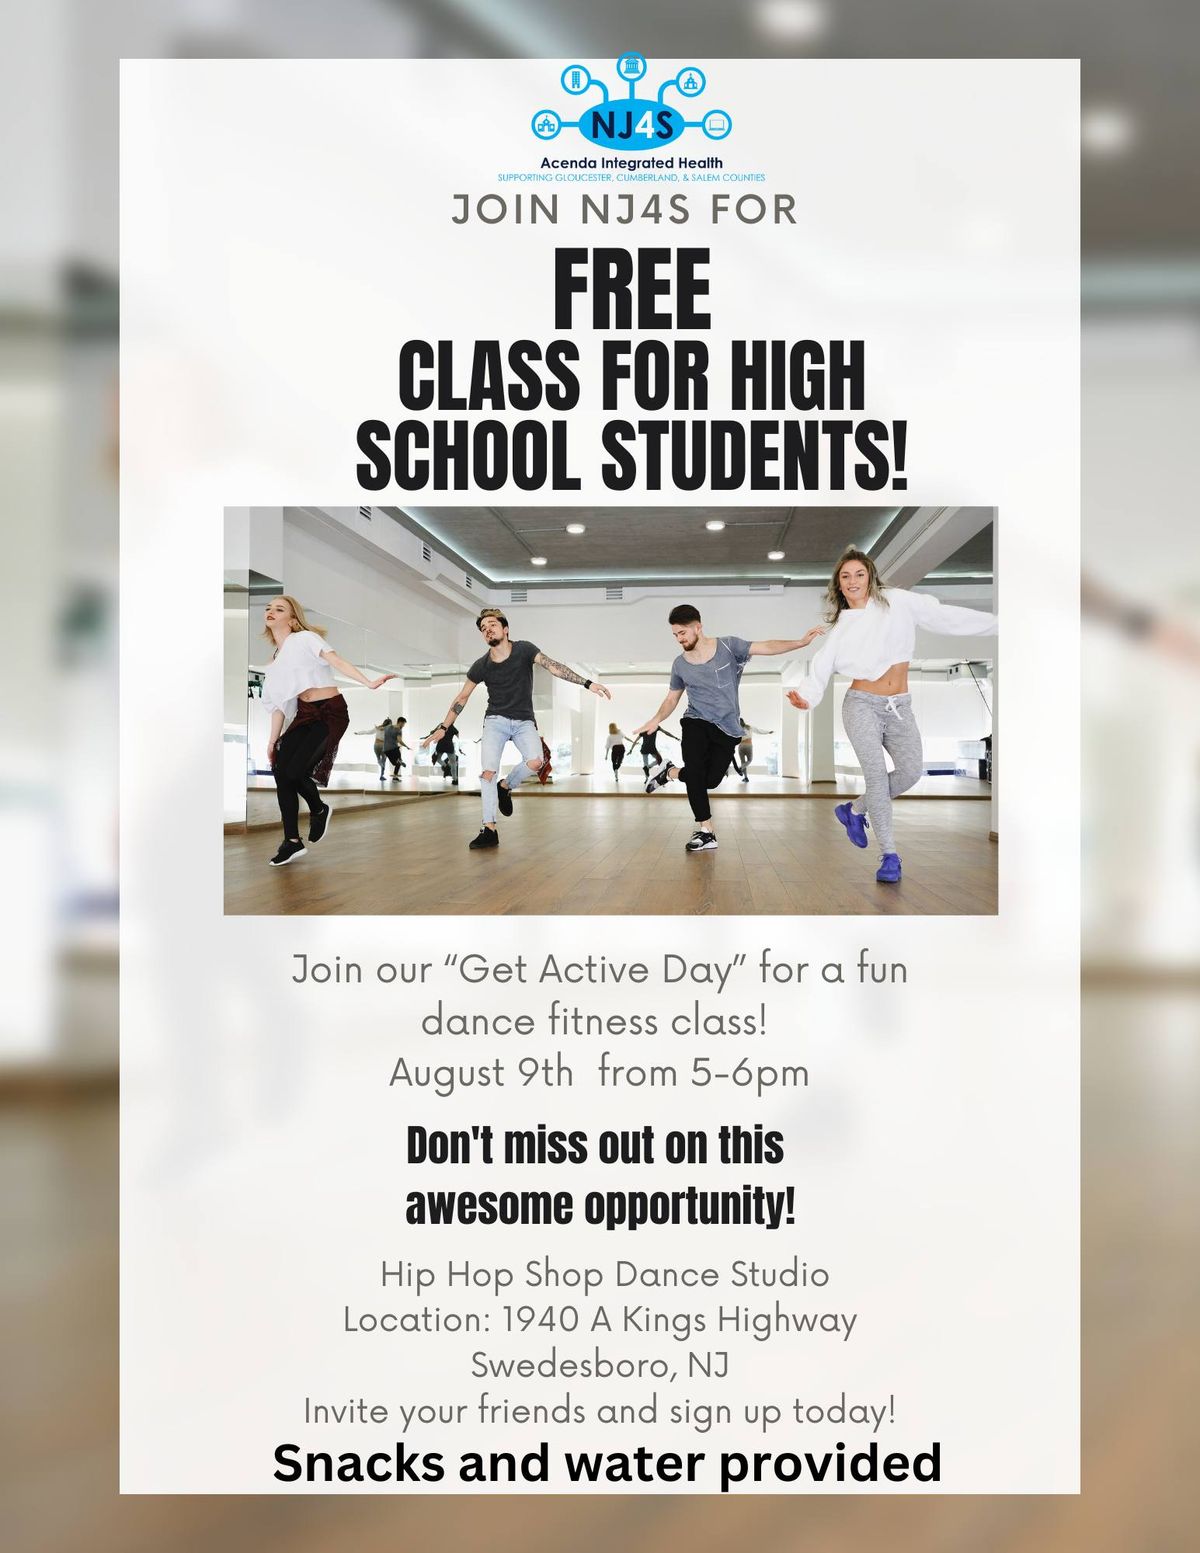 "Get Active" Dance Fitness Class for High School Students!